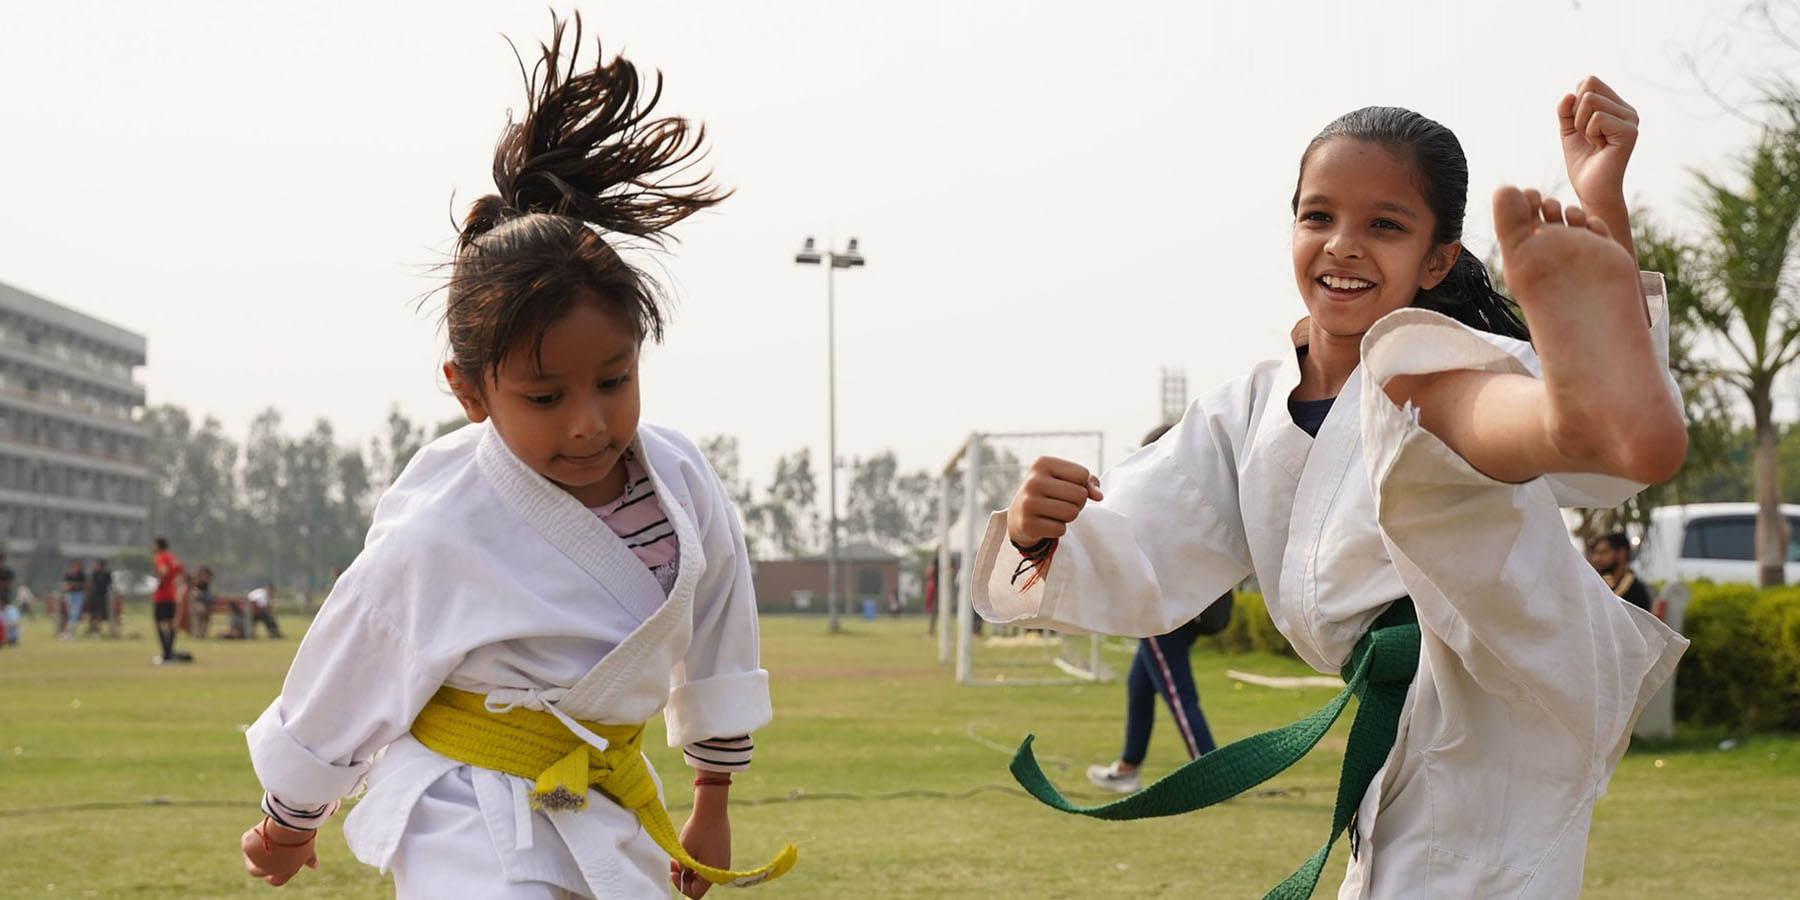 University of Winchester inclusivity in sport research: two young girls doing karate